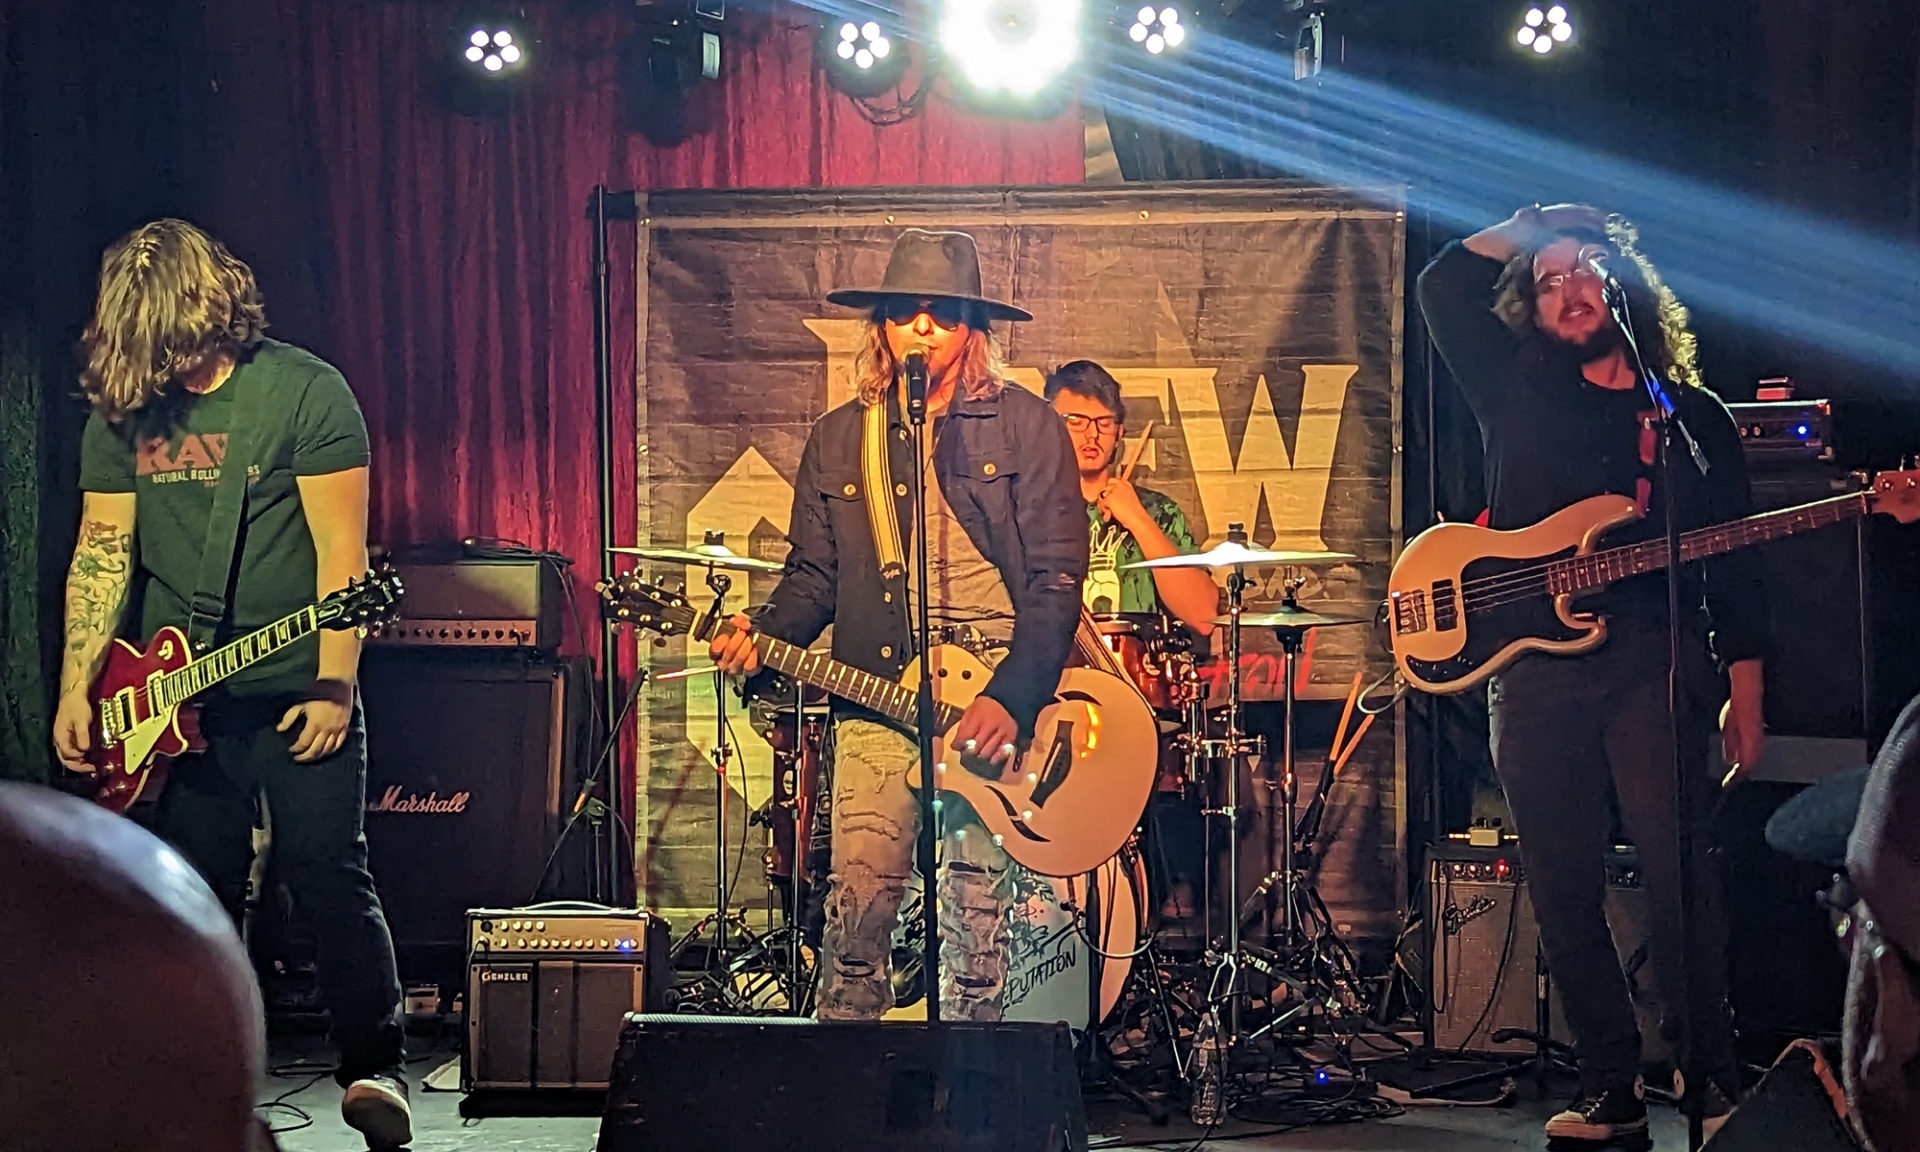 Four band members of Drew Cagle and the Reputation are performing live on a stage.